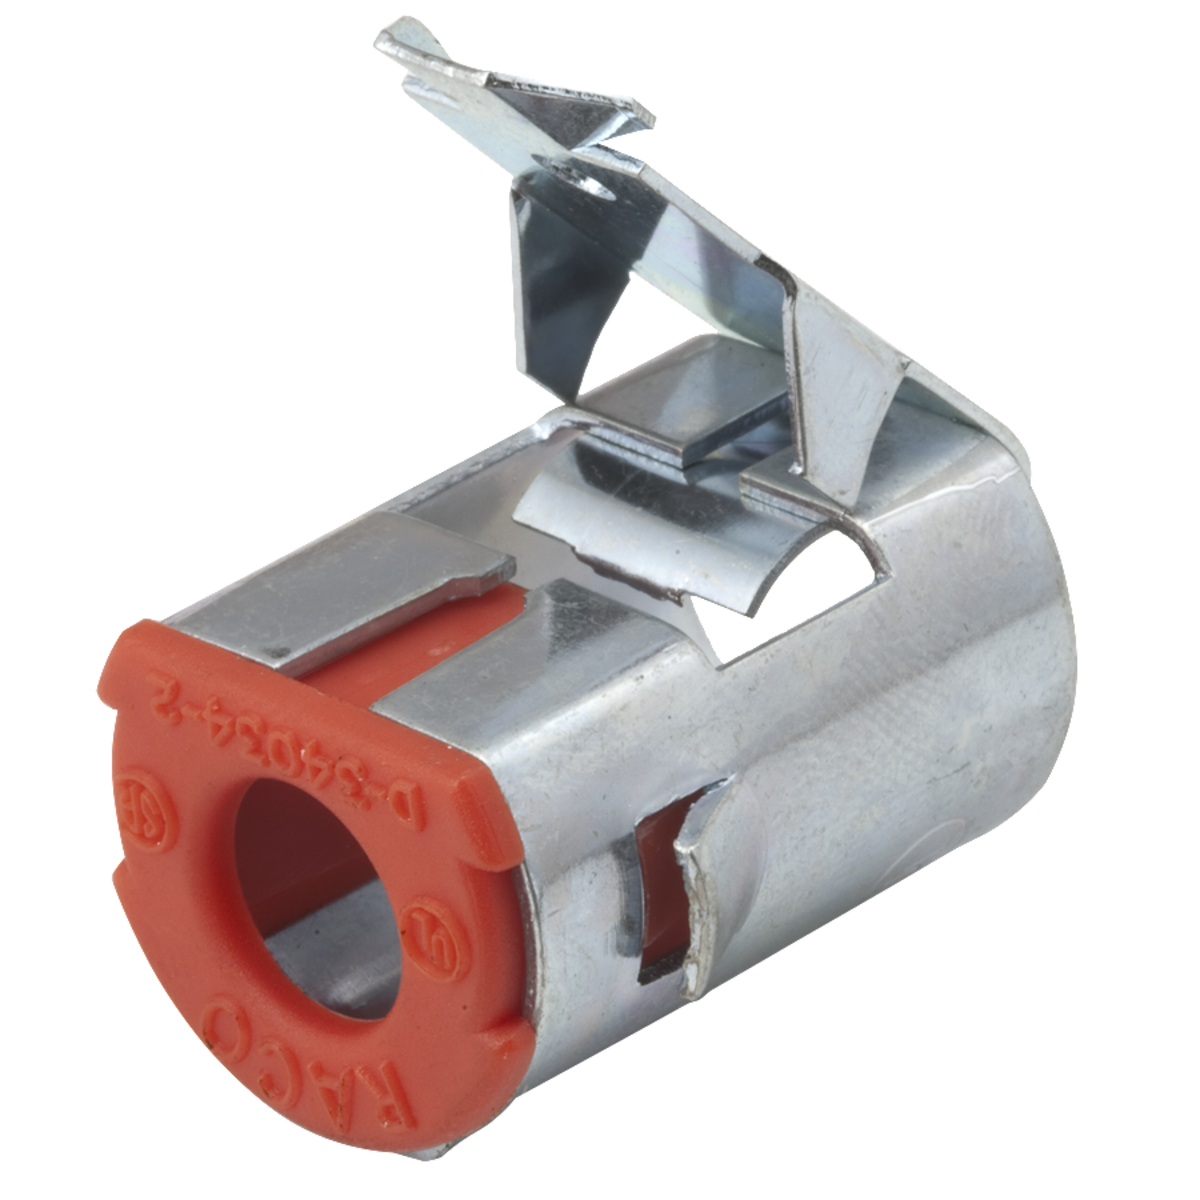 REDI-LOC® Cable Connectors Steel, 1/2 In. Trade Size MCI: AL .434 - .530 MCI: Steel .400 - .530 MCI-A: Steel (.440 - .510) AC: Steel/AL 14-2 (.400) to 12-3